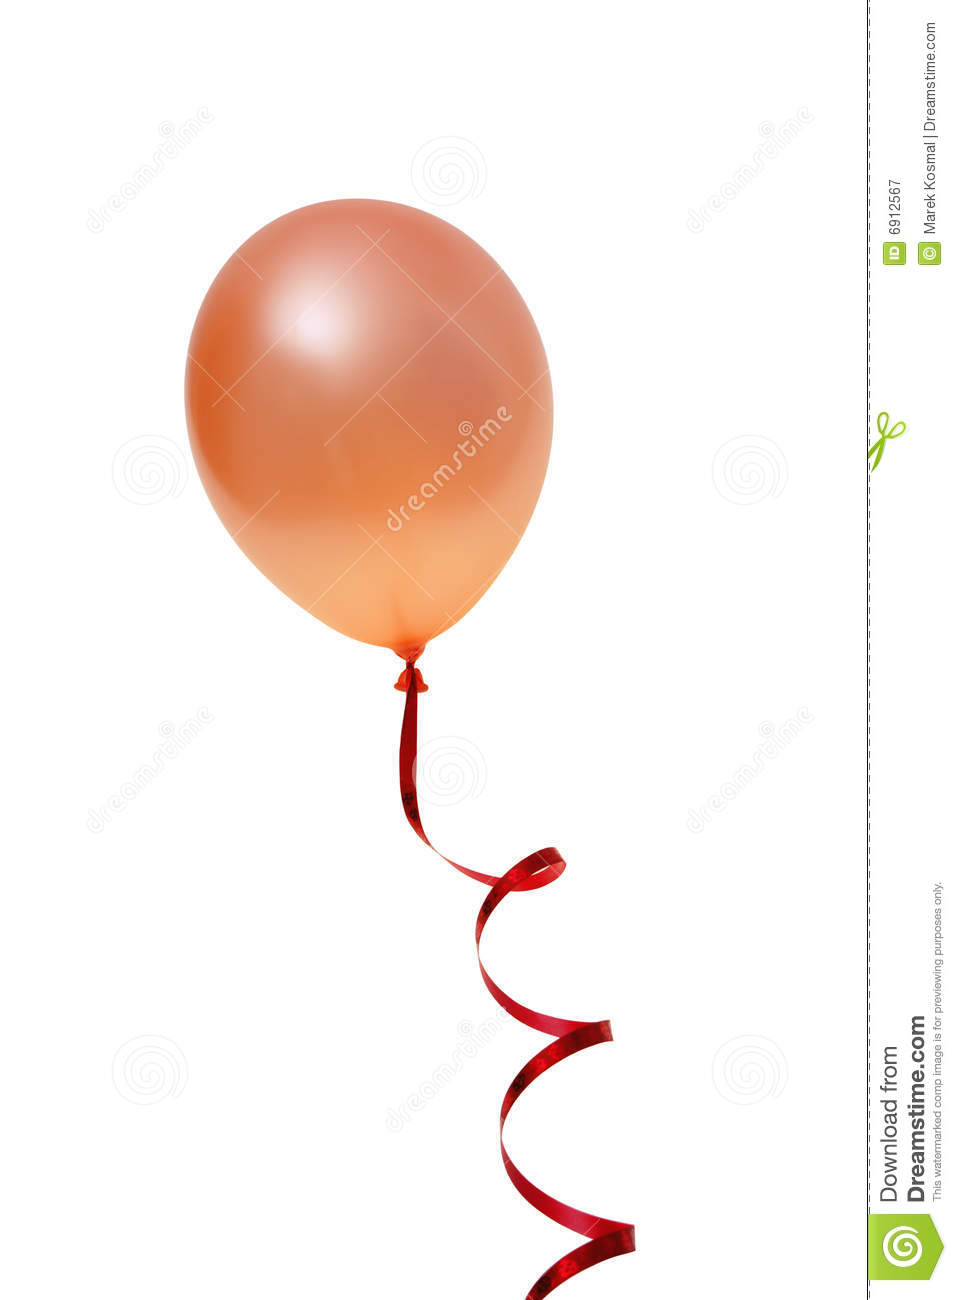 Orange Balloon With Ribbon Isolated On White Background  With Clipping